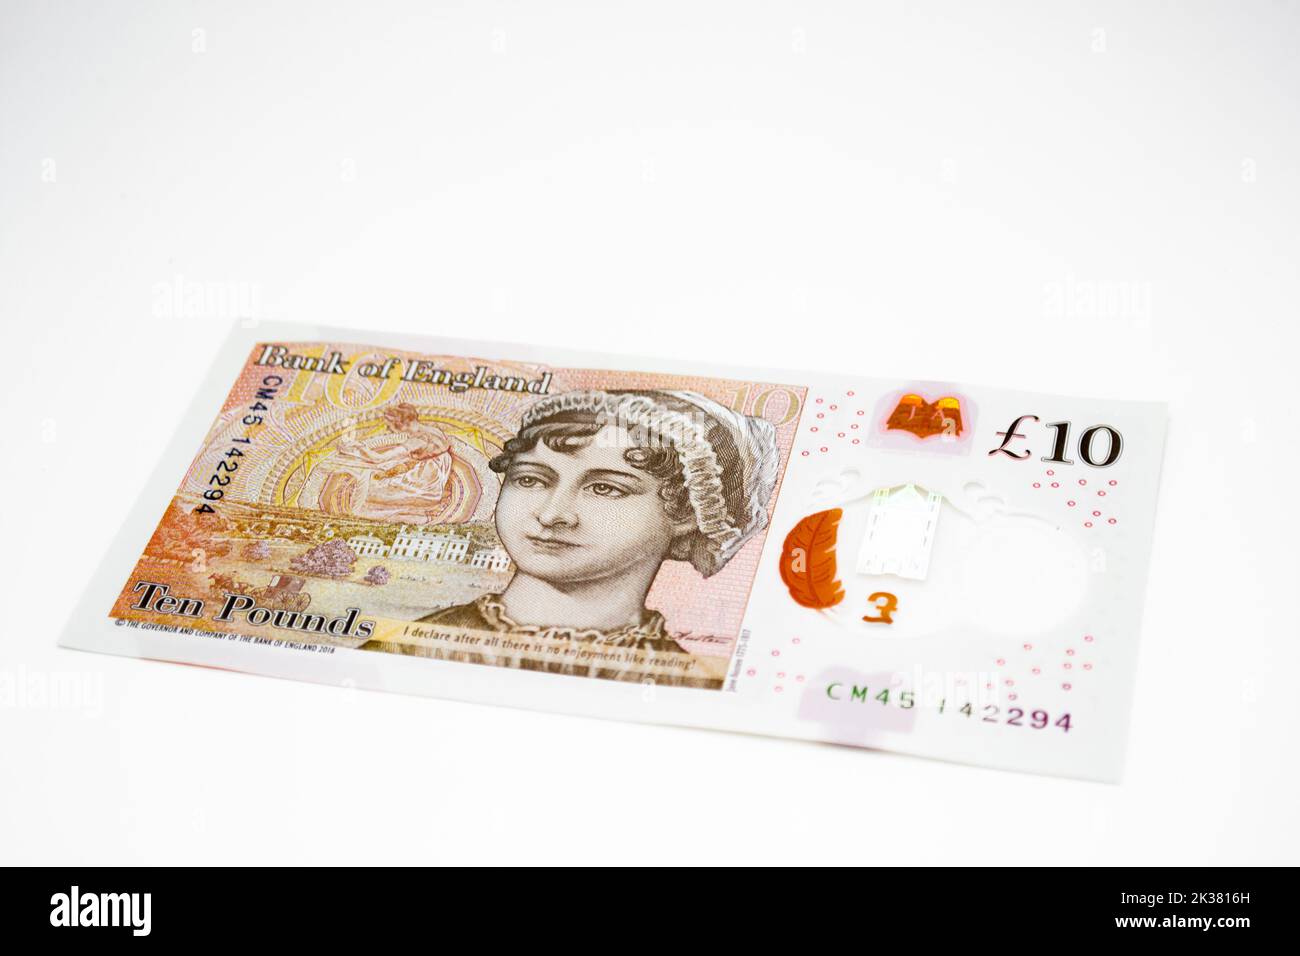 MOSCOW, Russia, February 2020: One banknote with a face value of 10 pounds sterling. With the image of Jane Austen. On a white background. Stock Photo